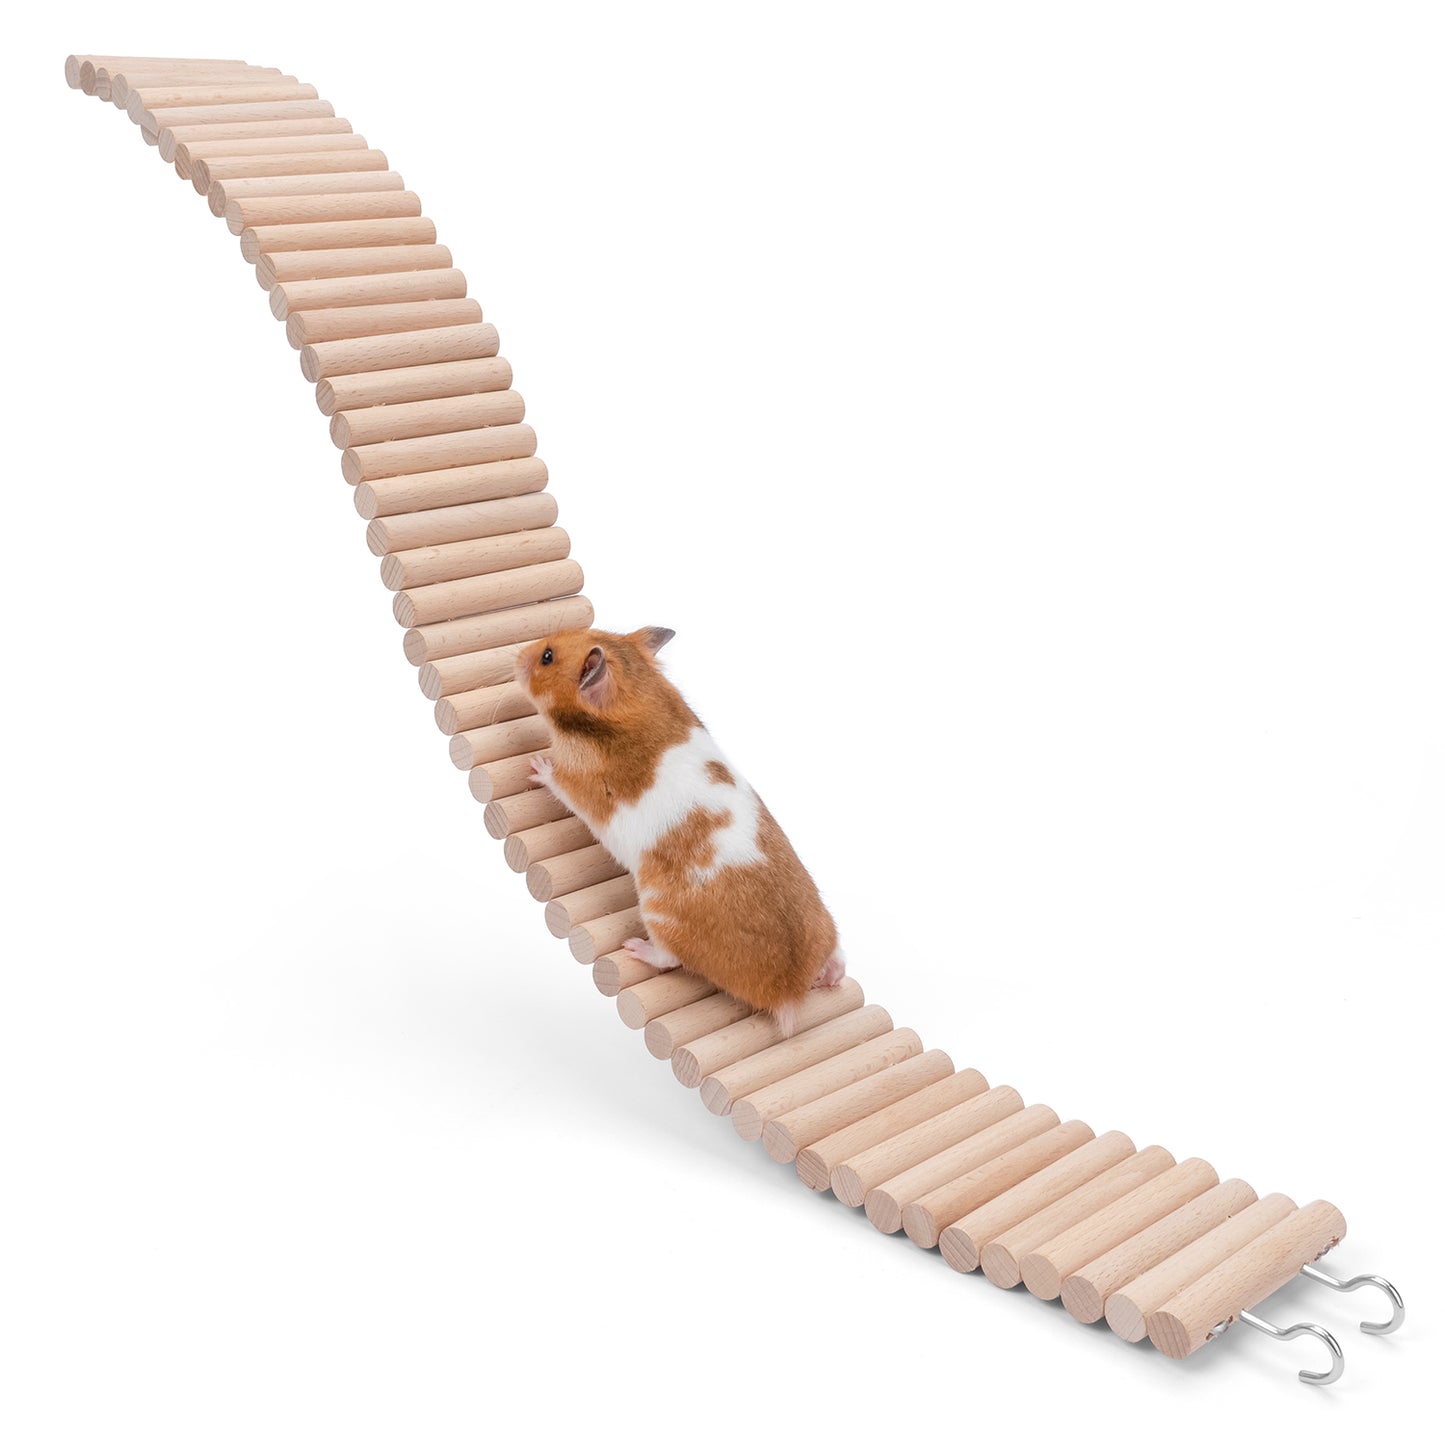 Niteangel Hamster Suspension Bridge Toy - Long Climbing Ladder for Dwarf Syrian Hamster Mice Mouse Gerbils and Other Small Animals